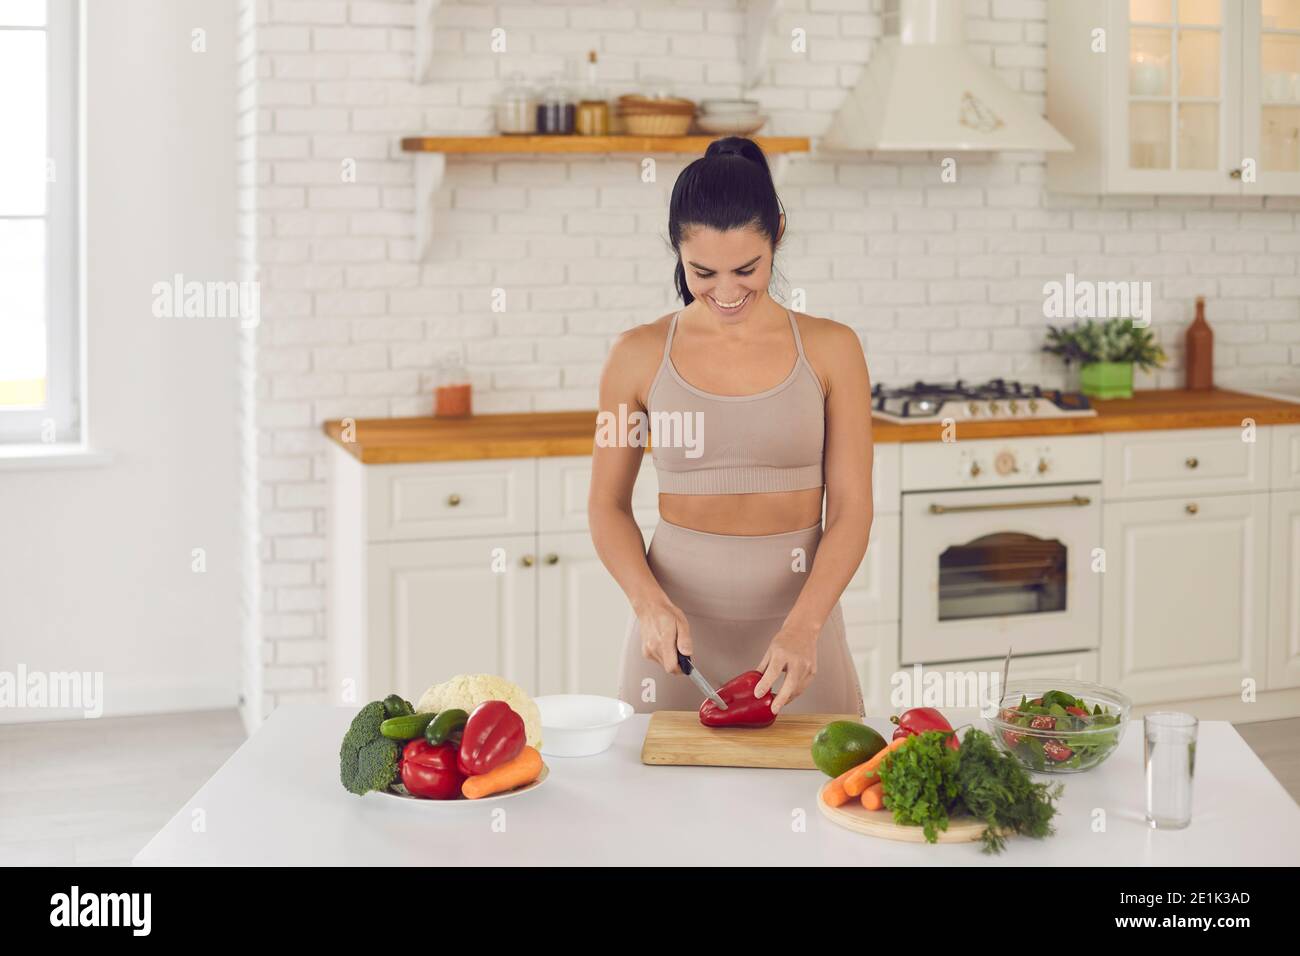 Sports woman records a video for her blog and teaches how to properly prepare healthy natural food. Stock Photo